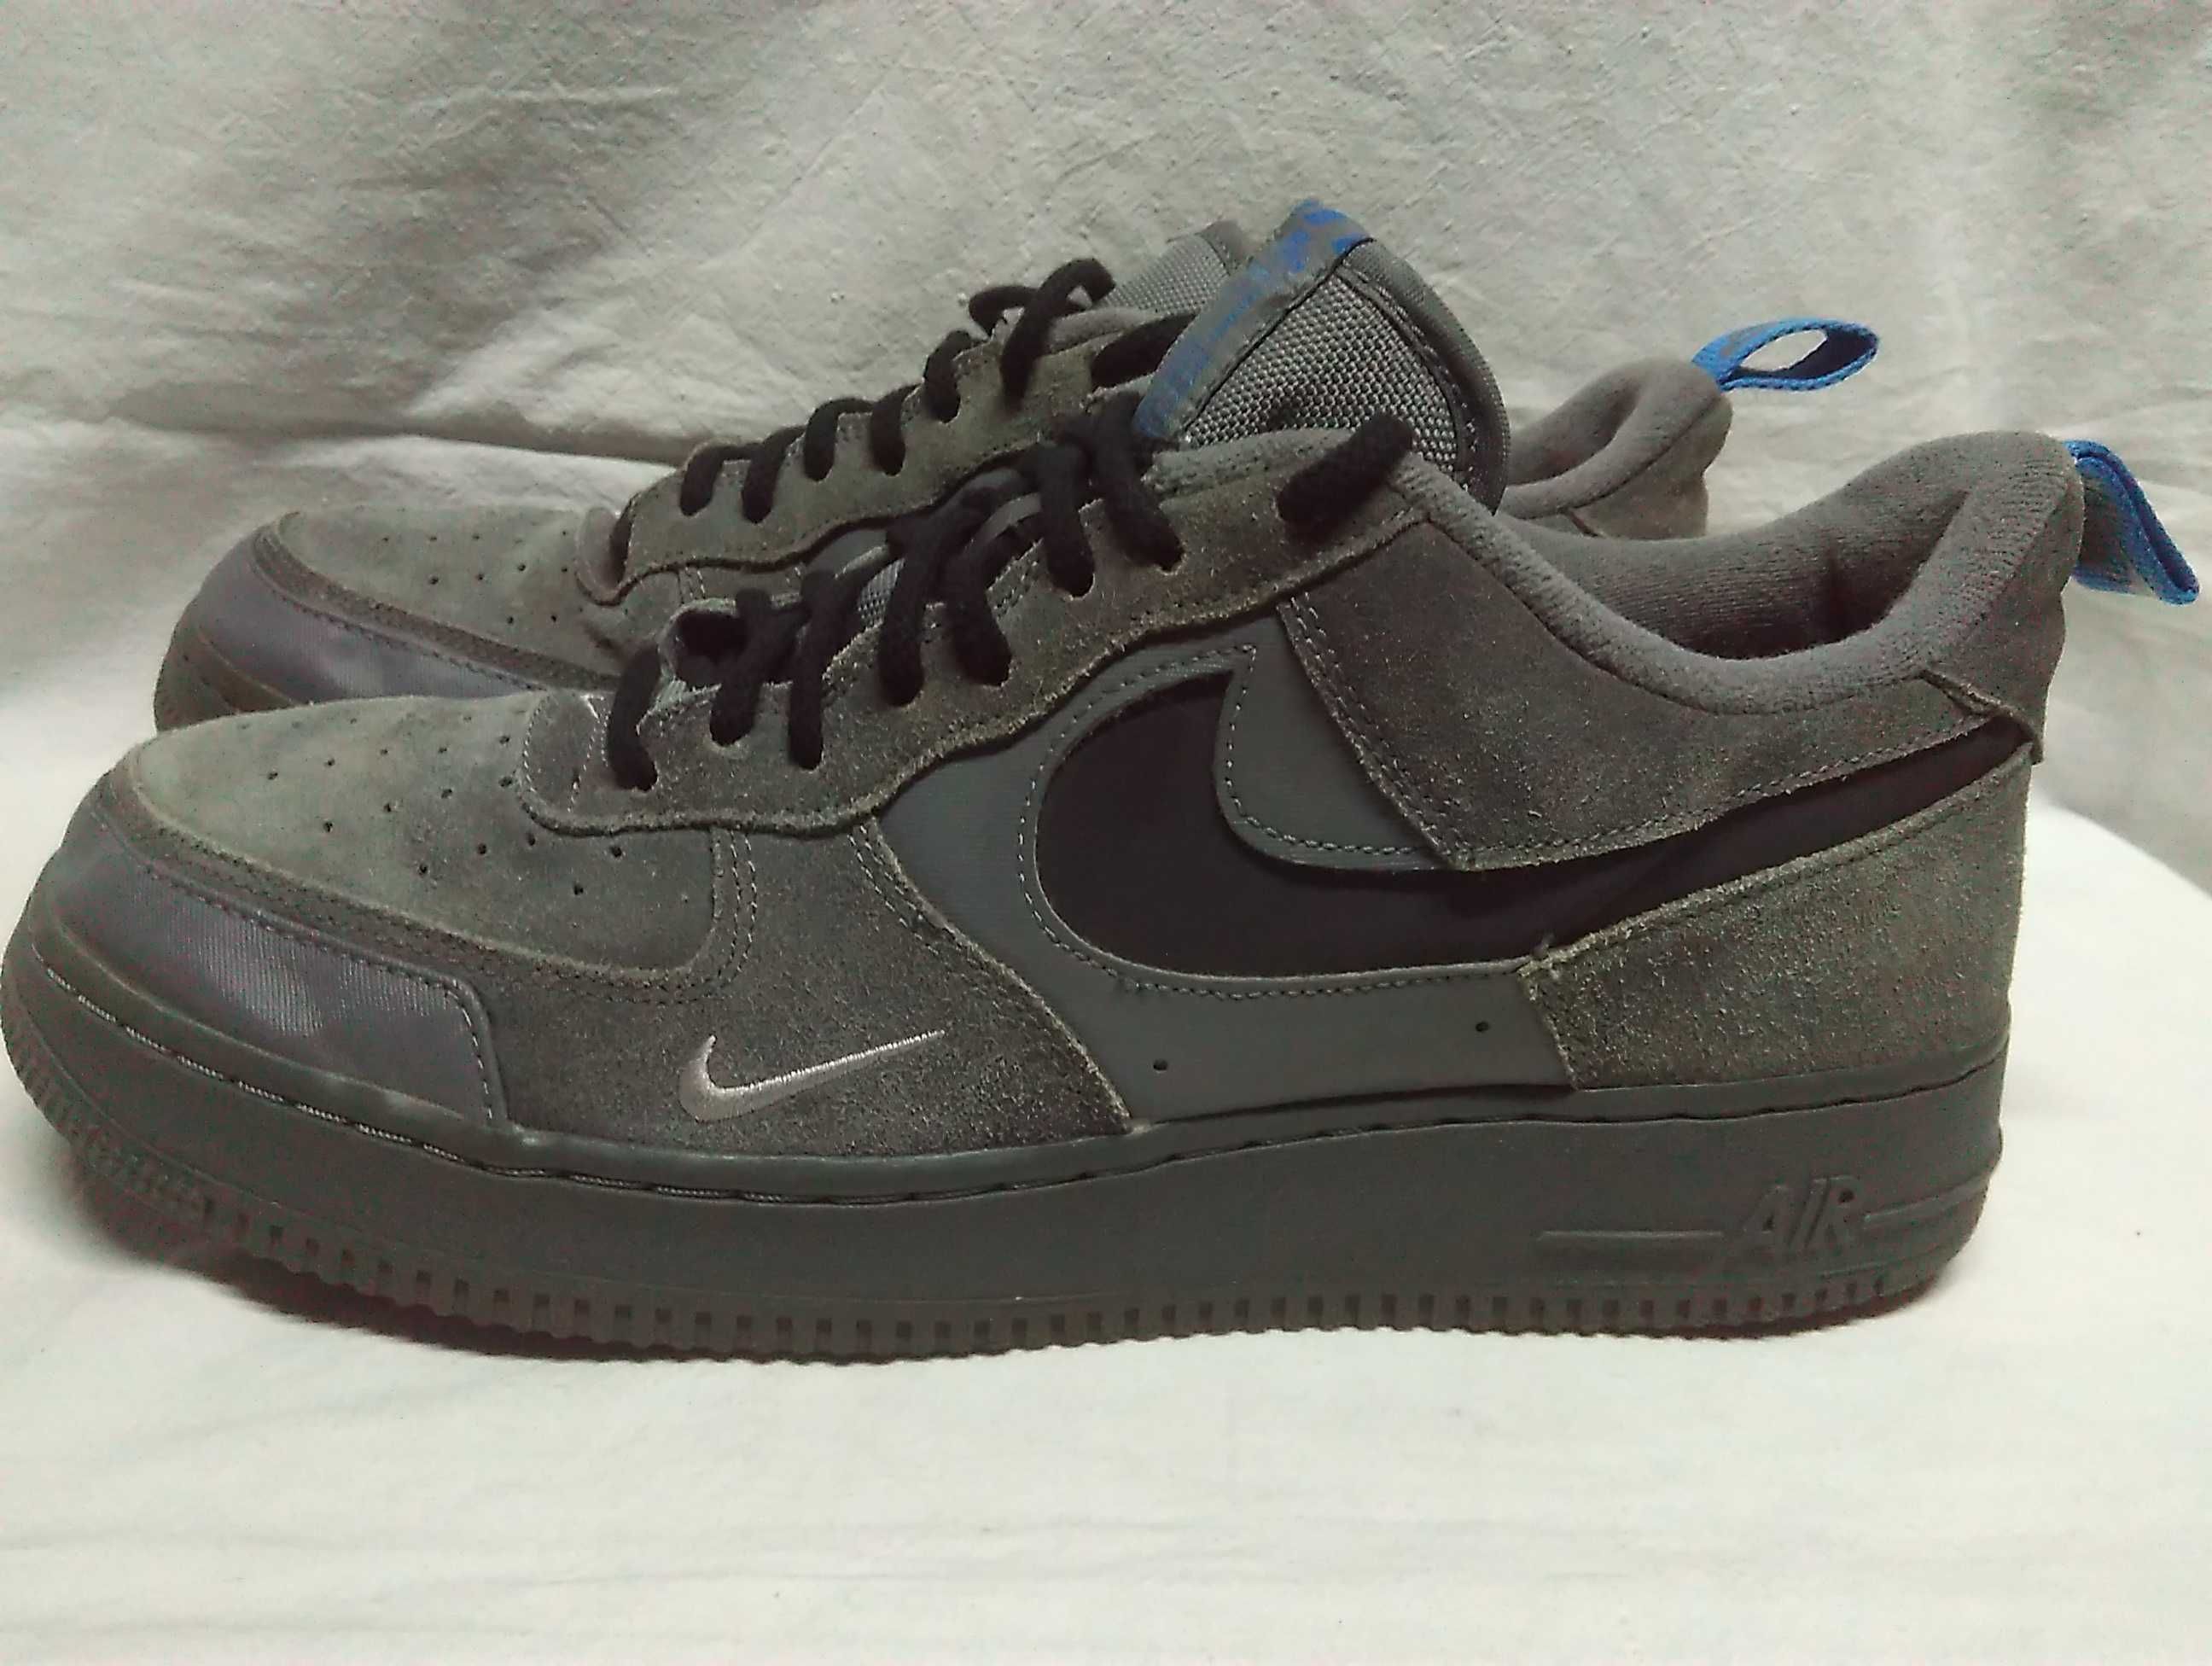 Buty Nike Air Force 1 Low Cut Out Swoosh rozm. 45